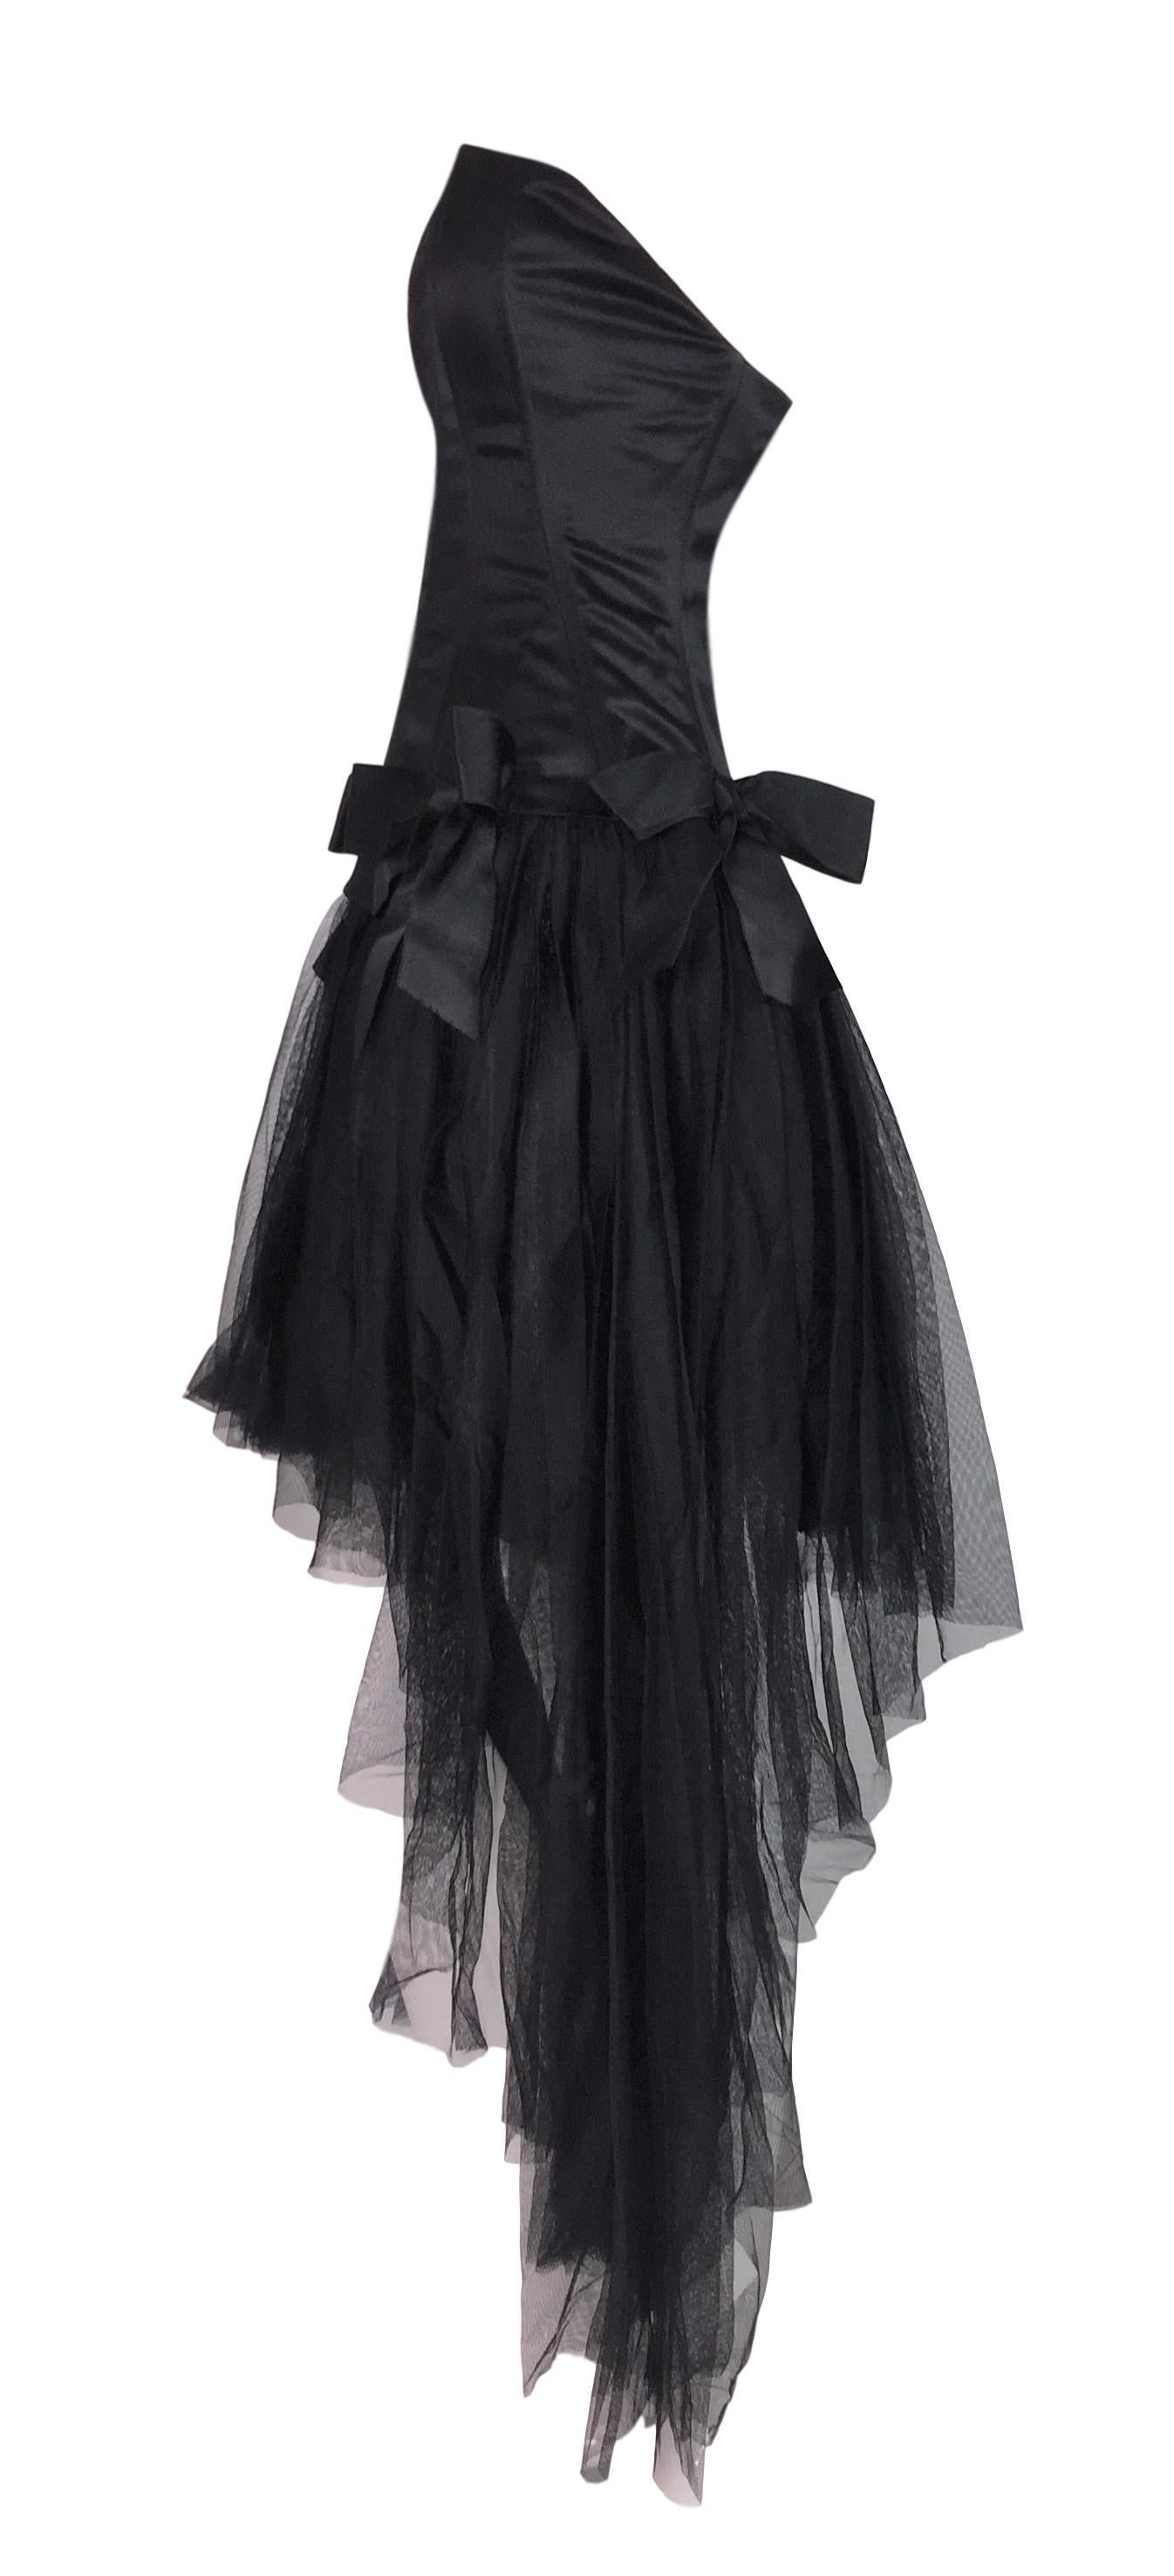 C. 1995 Chanel Ballerina Sheer Black Mesh Bustier Dress w/ Tulle and ...